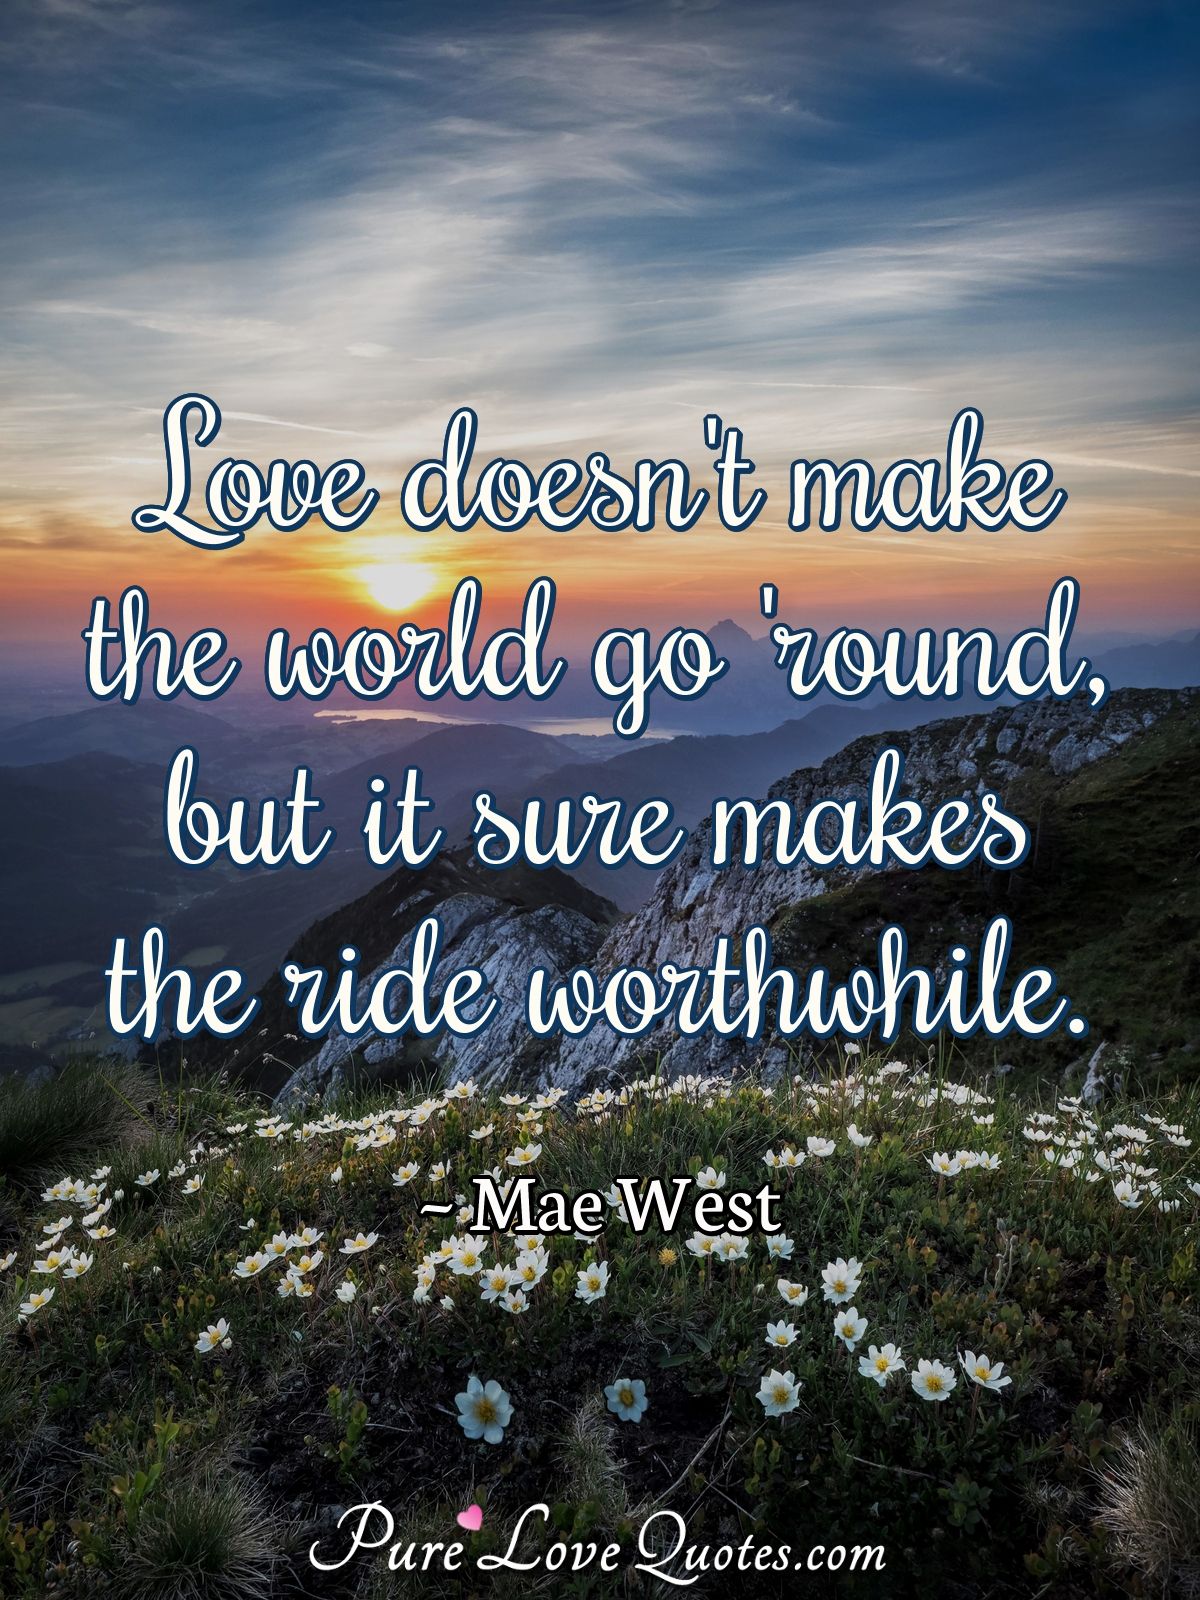 Love doesn't make the world go 'round, but it sure makes the ride worthwhile. - Mae West